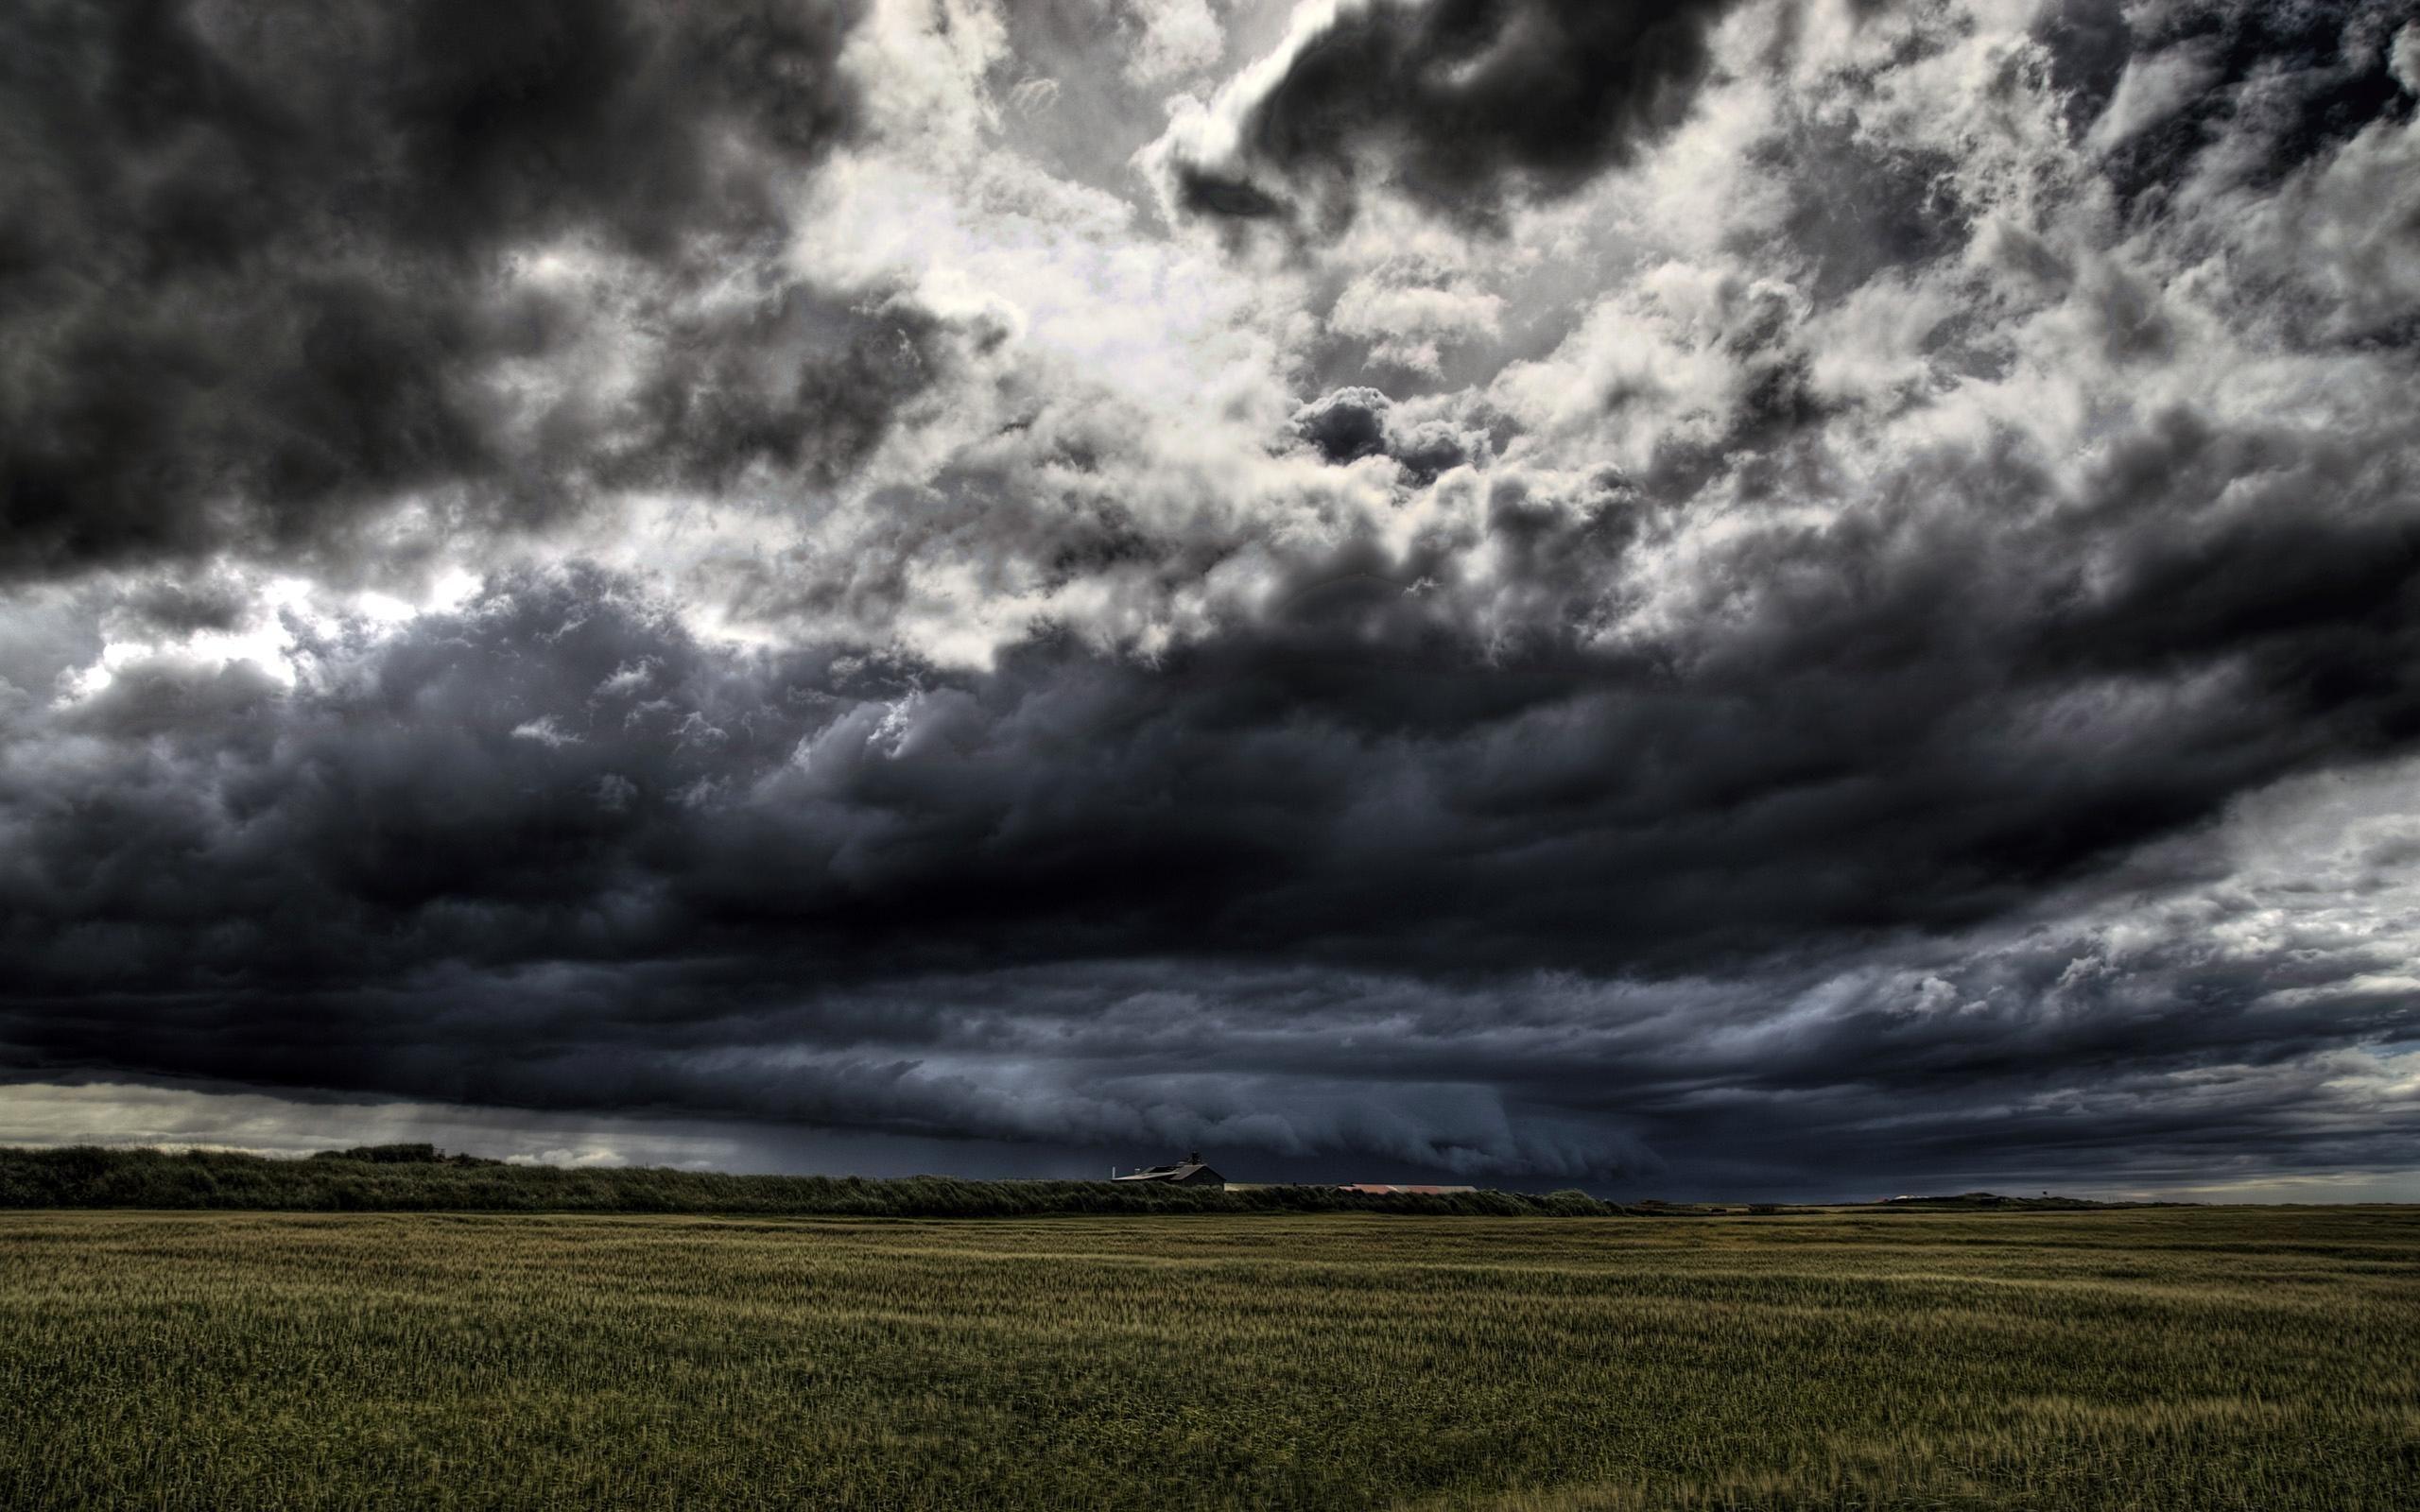 Dark clouds from clear sky suddenly theme wallpaper free desktop